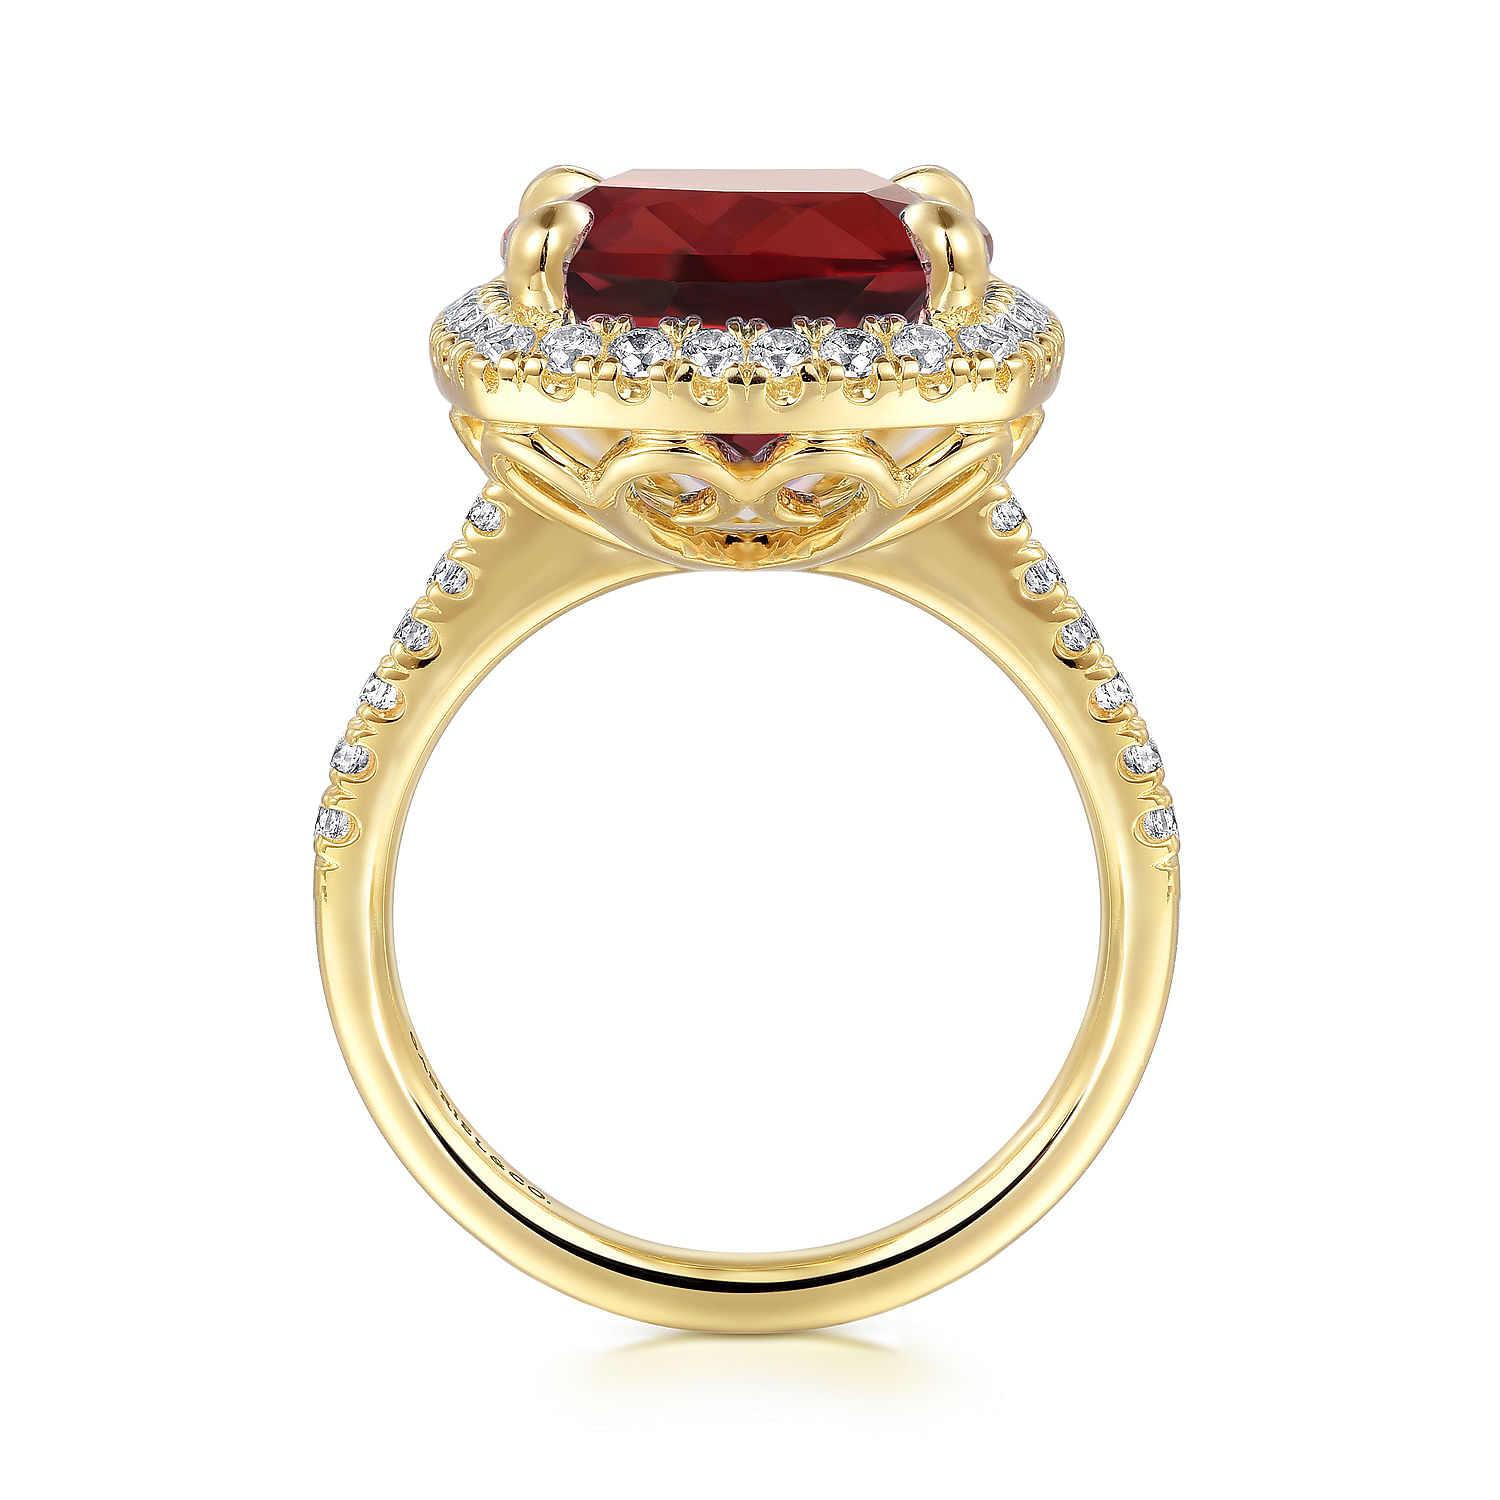 14K Yellow Gold Diamond and Garnet Cushion Cut Ladies Ring With Flower Pattern Gallery